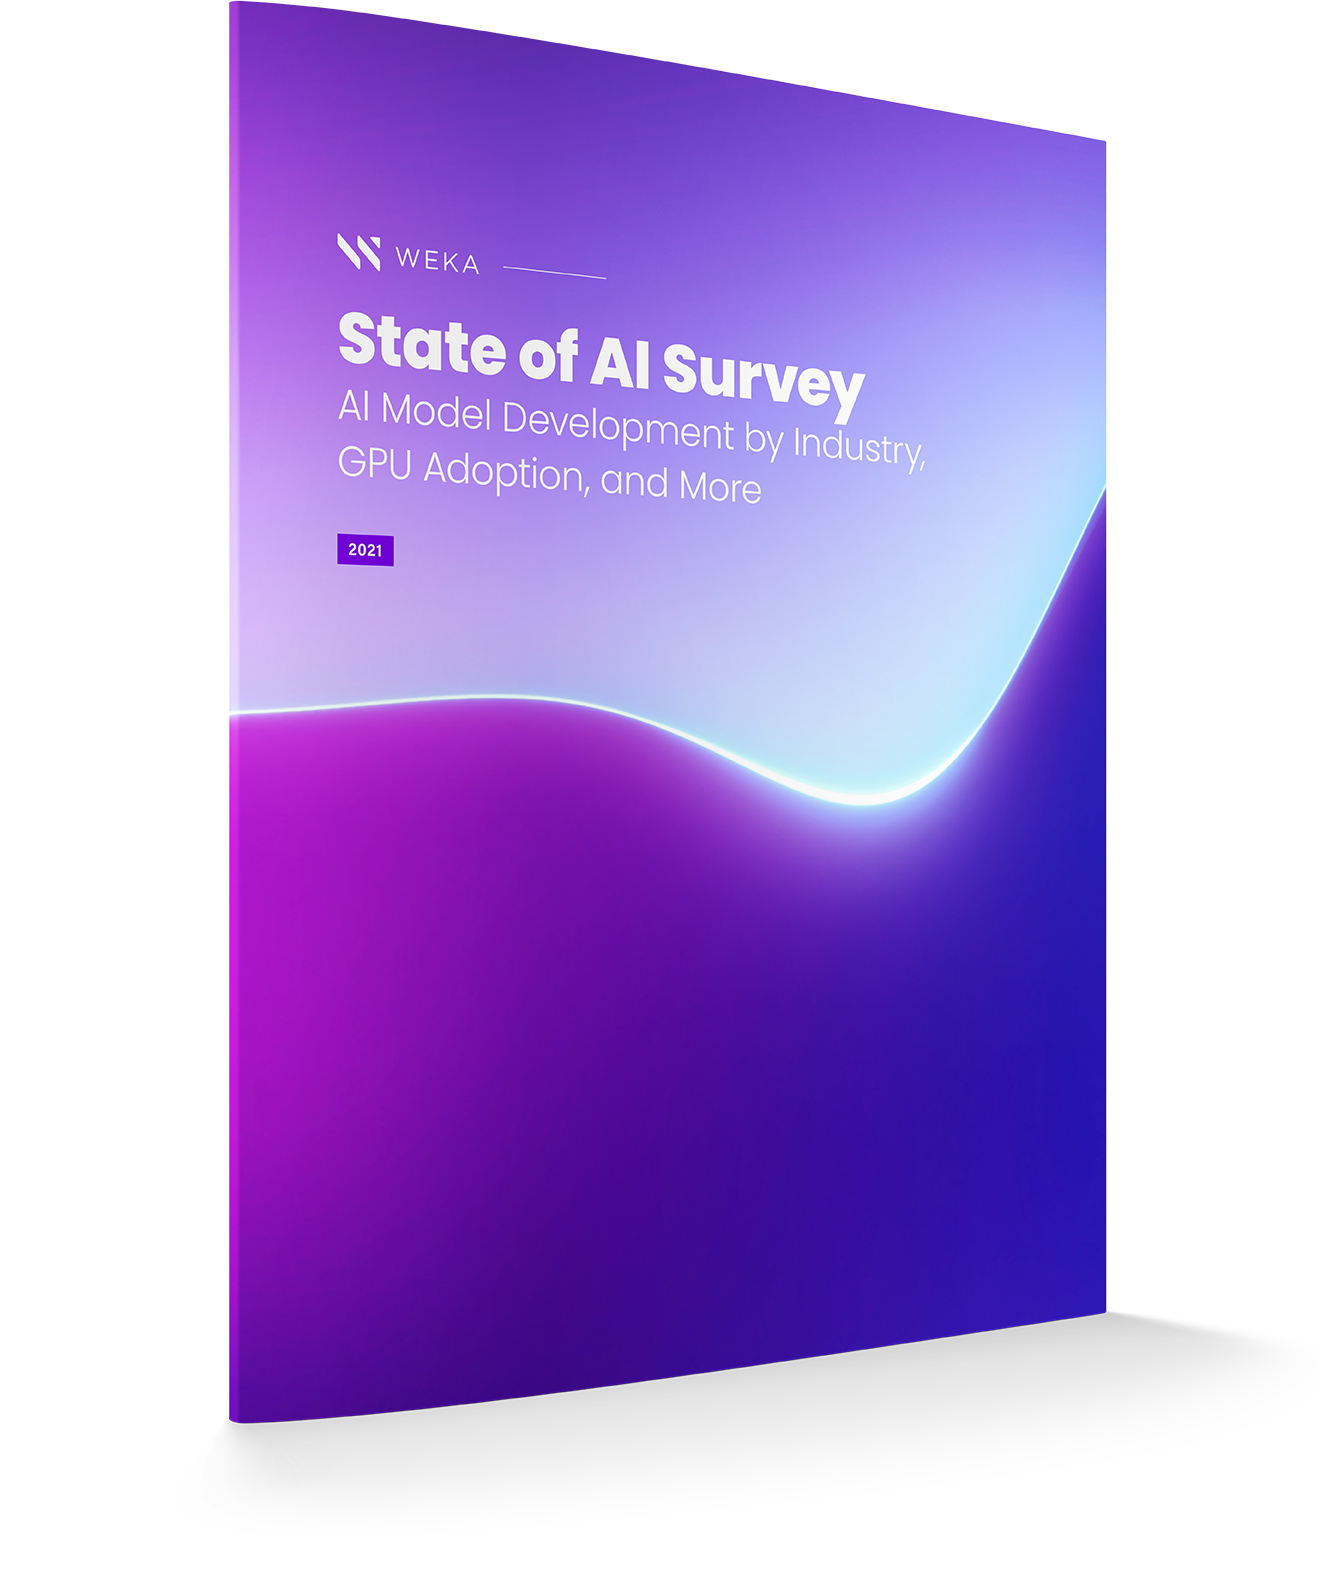 The State of AI and Analytics Infrastructure 2021